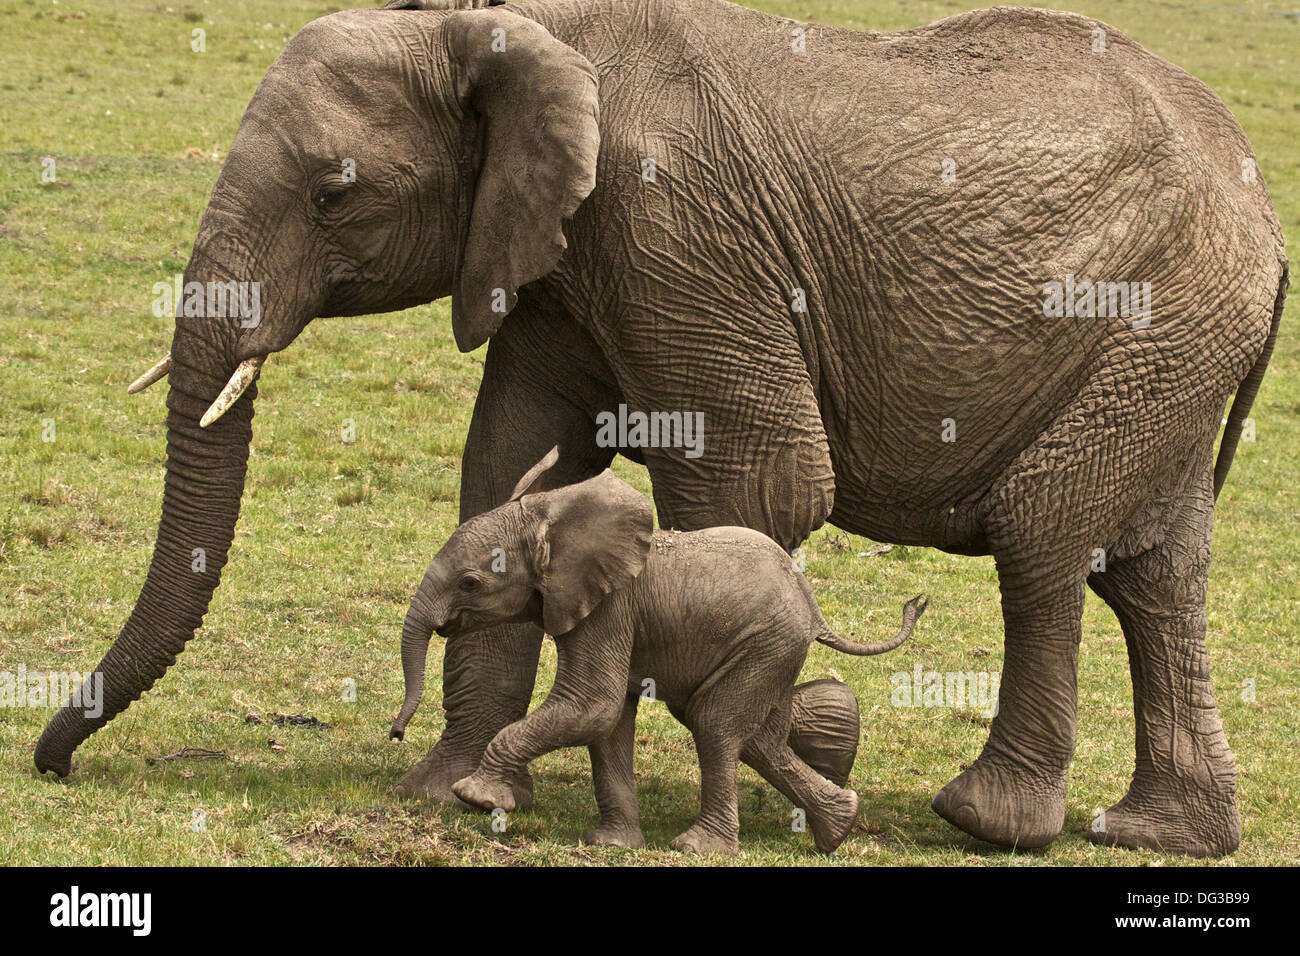 Baby Elephant out for a romp with its Mother Stock Photo